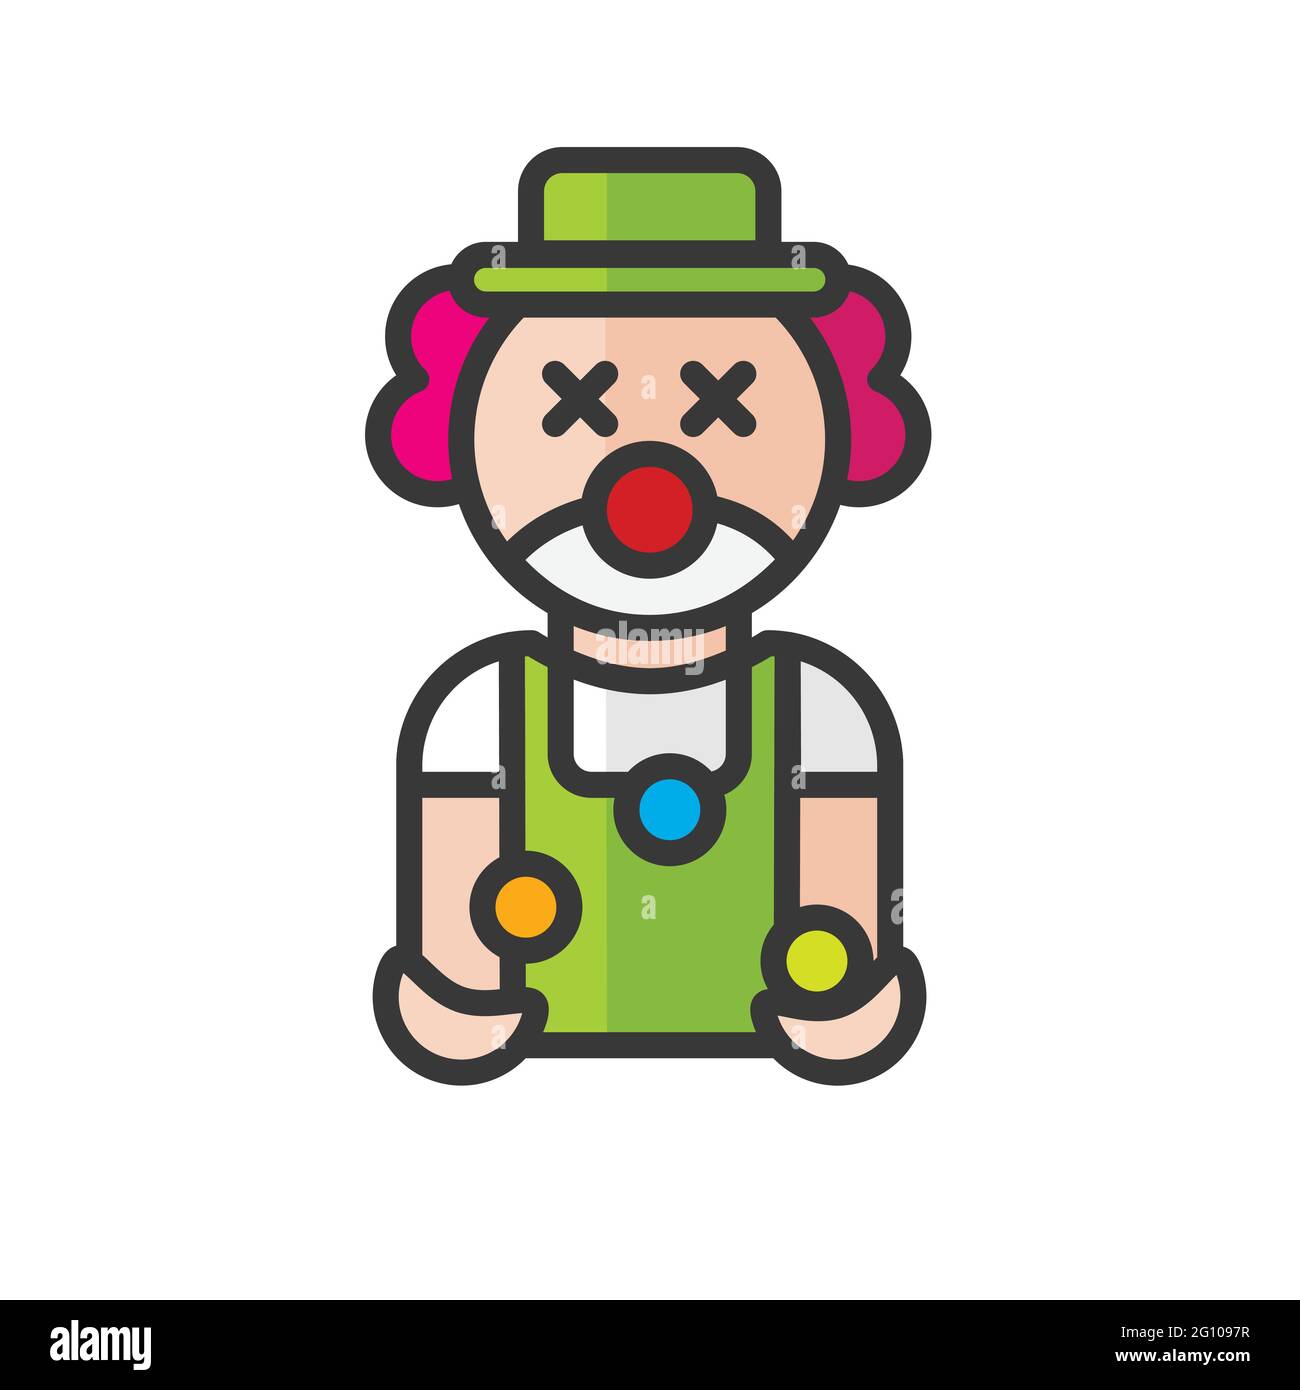 Clown Avatar Outline Icon Graphic by SIKEY STUDIO · Creative Fabrica